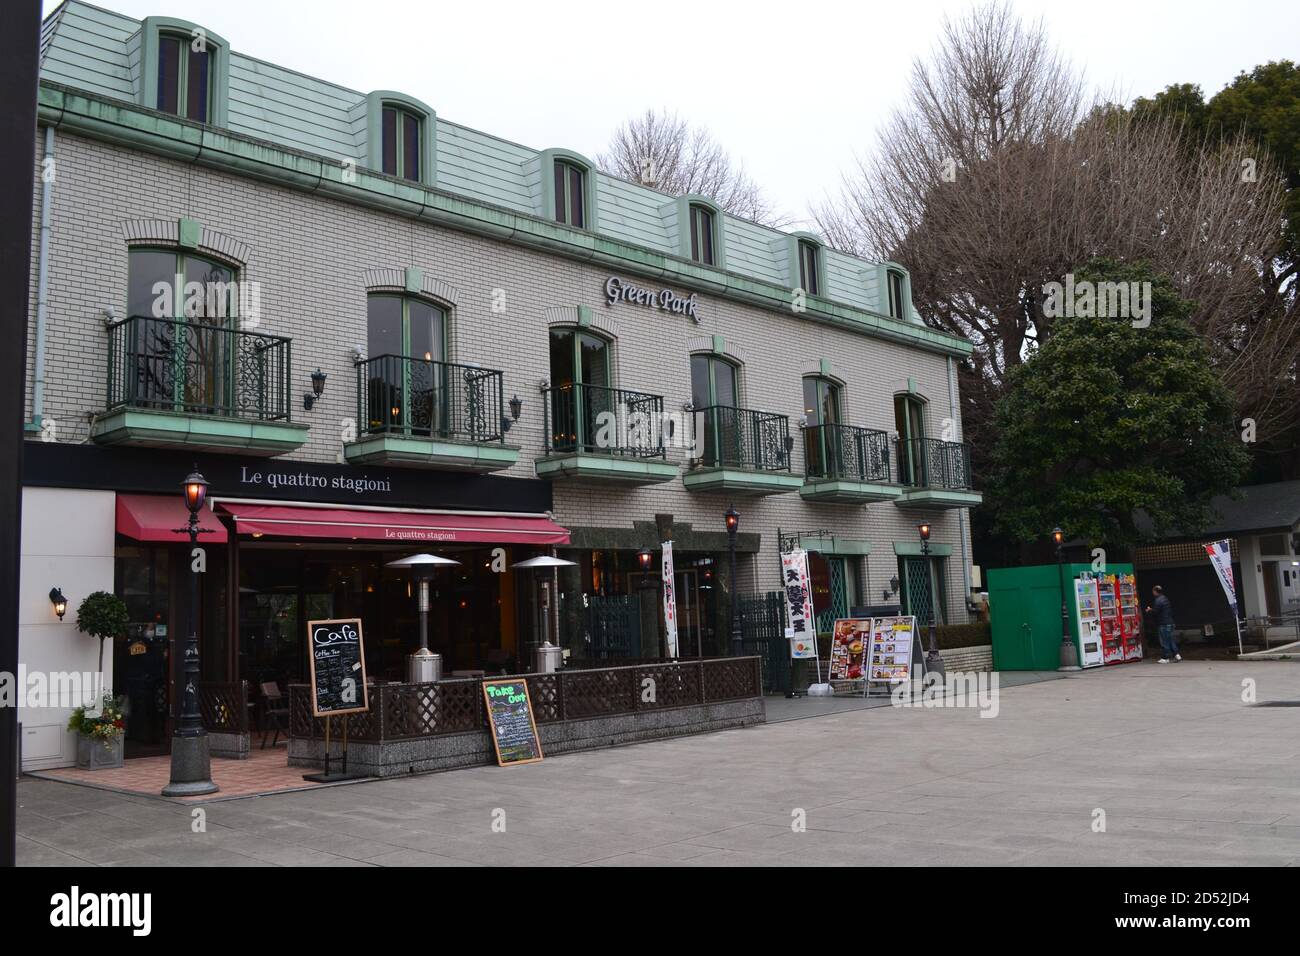 Tokyo, Japan-2/23/16: An empty restaurant (Le Quattro Stagioni) and other restaurants/cafes located in Ueno Park. Stock Photo